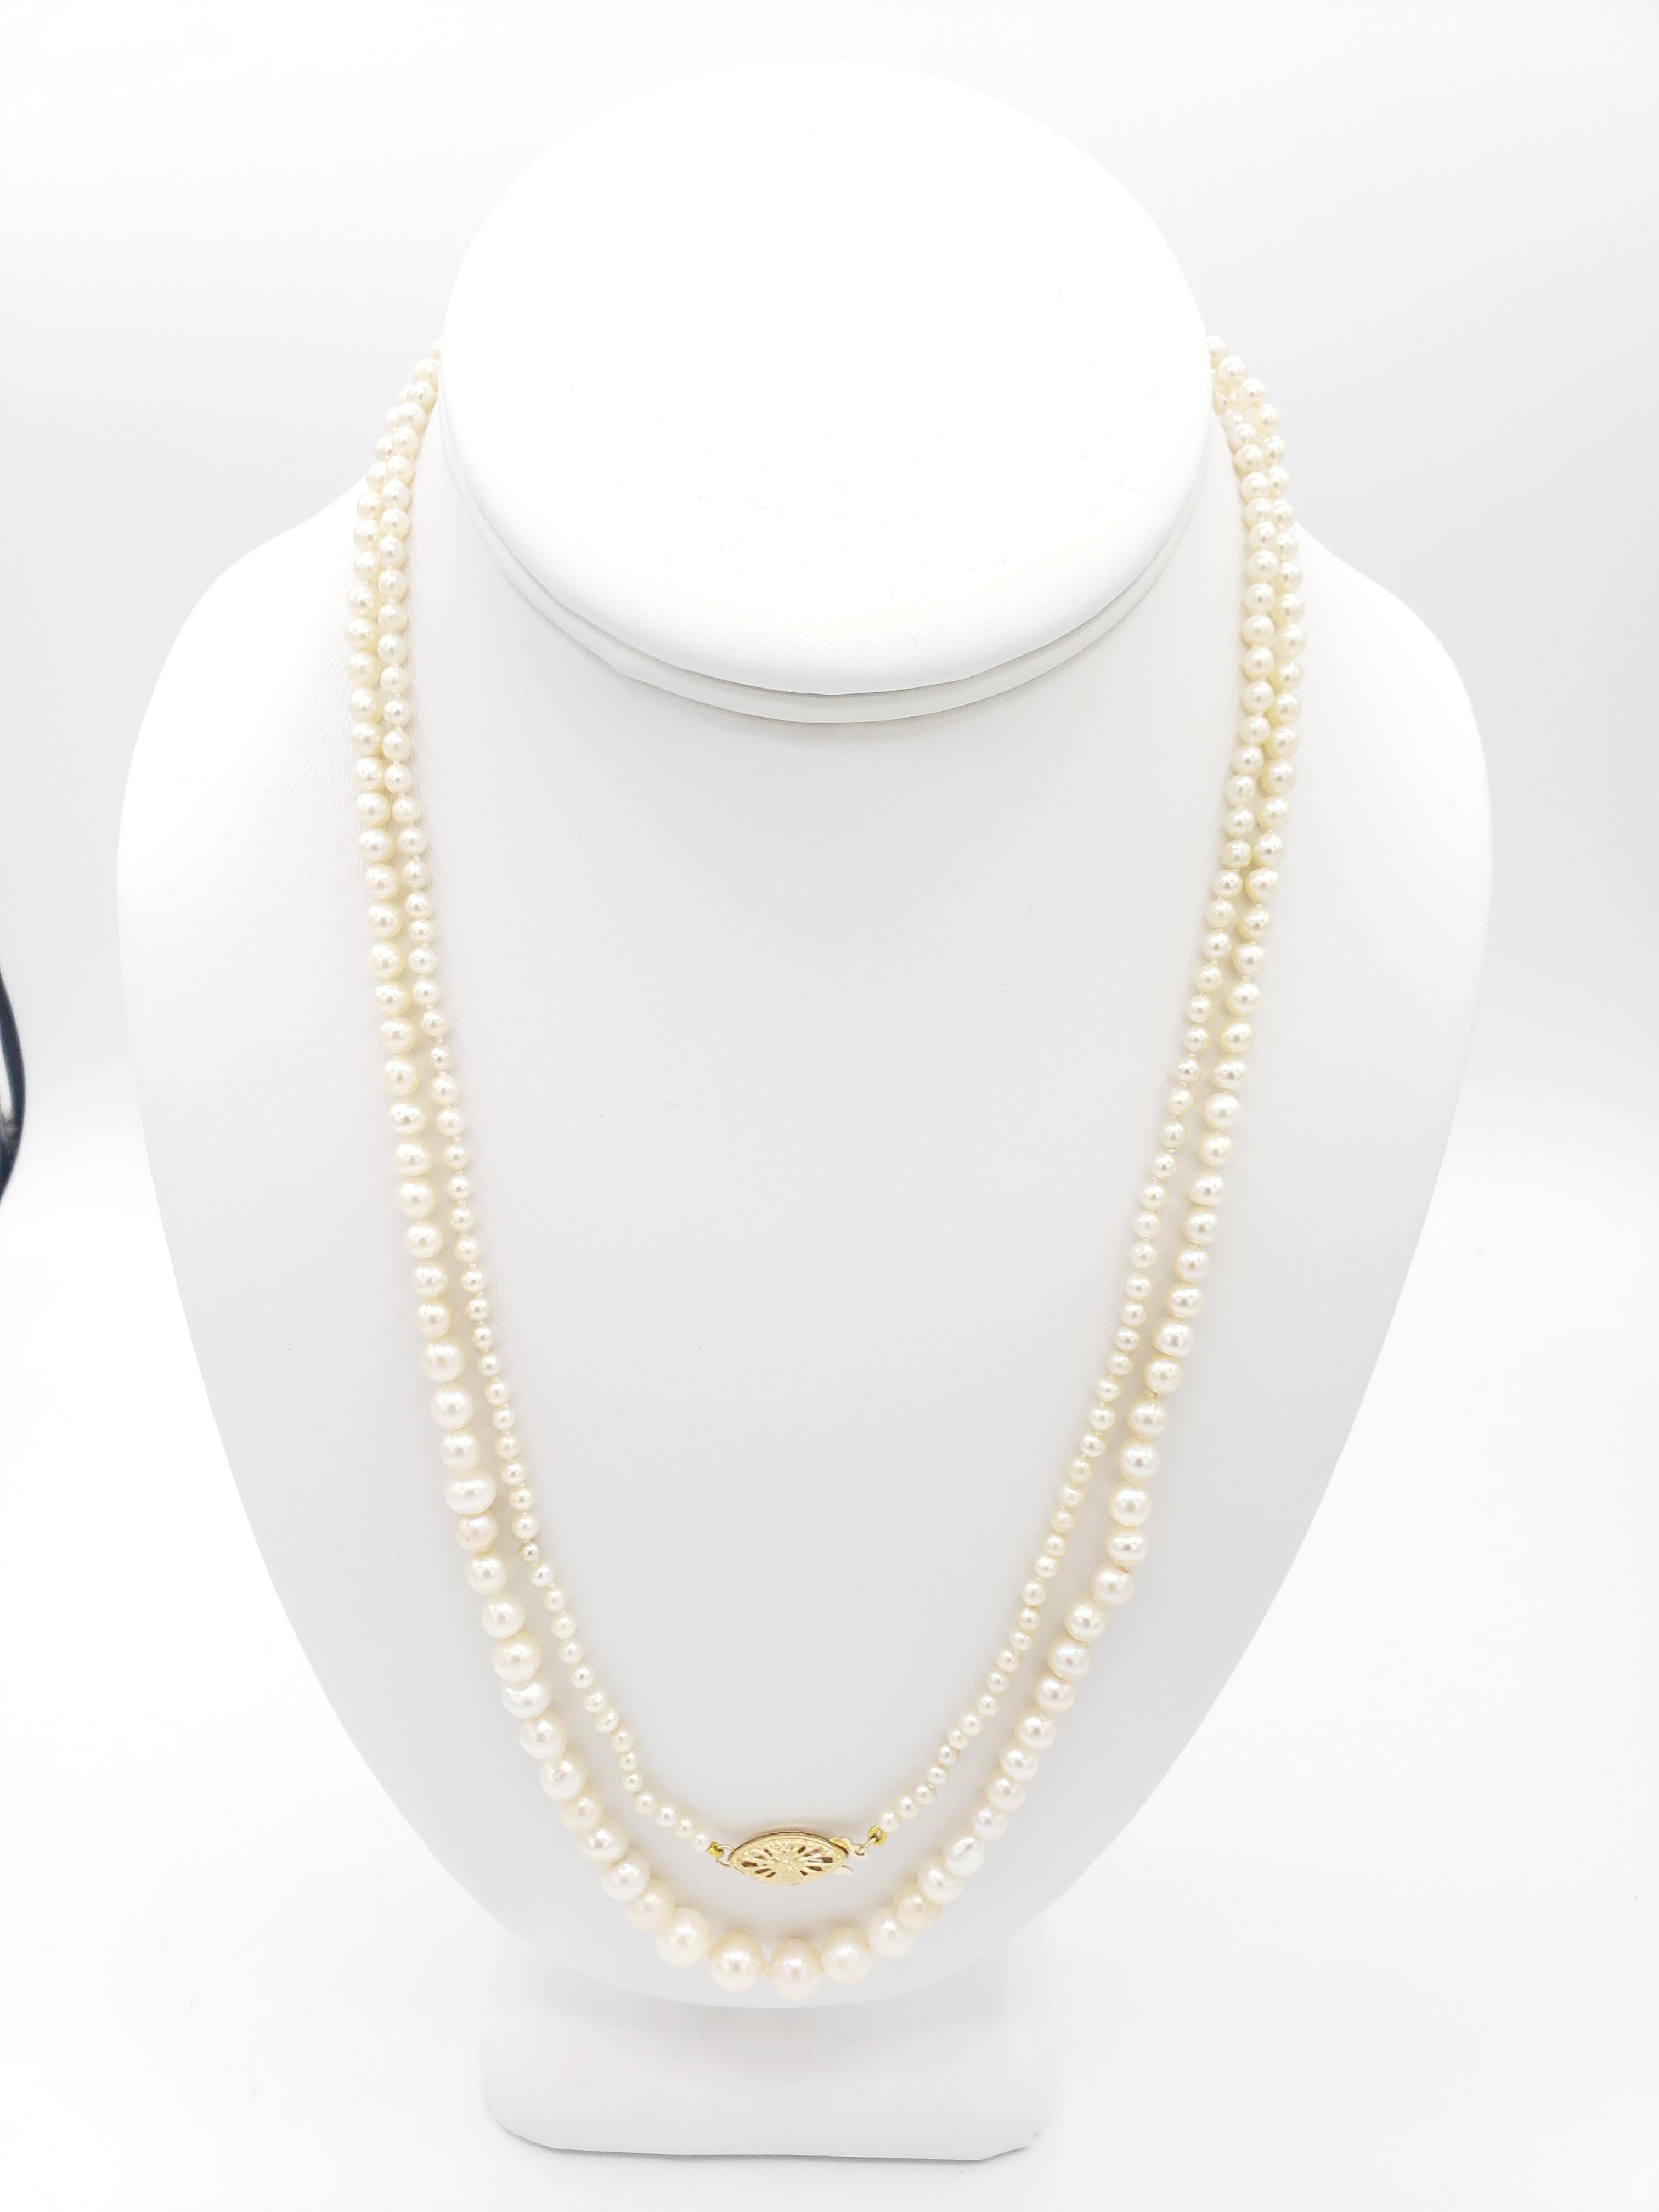 NEW GIA Cert Natural Saltwater Pearl Necklace 42 inches long. For Sale